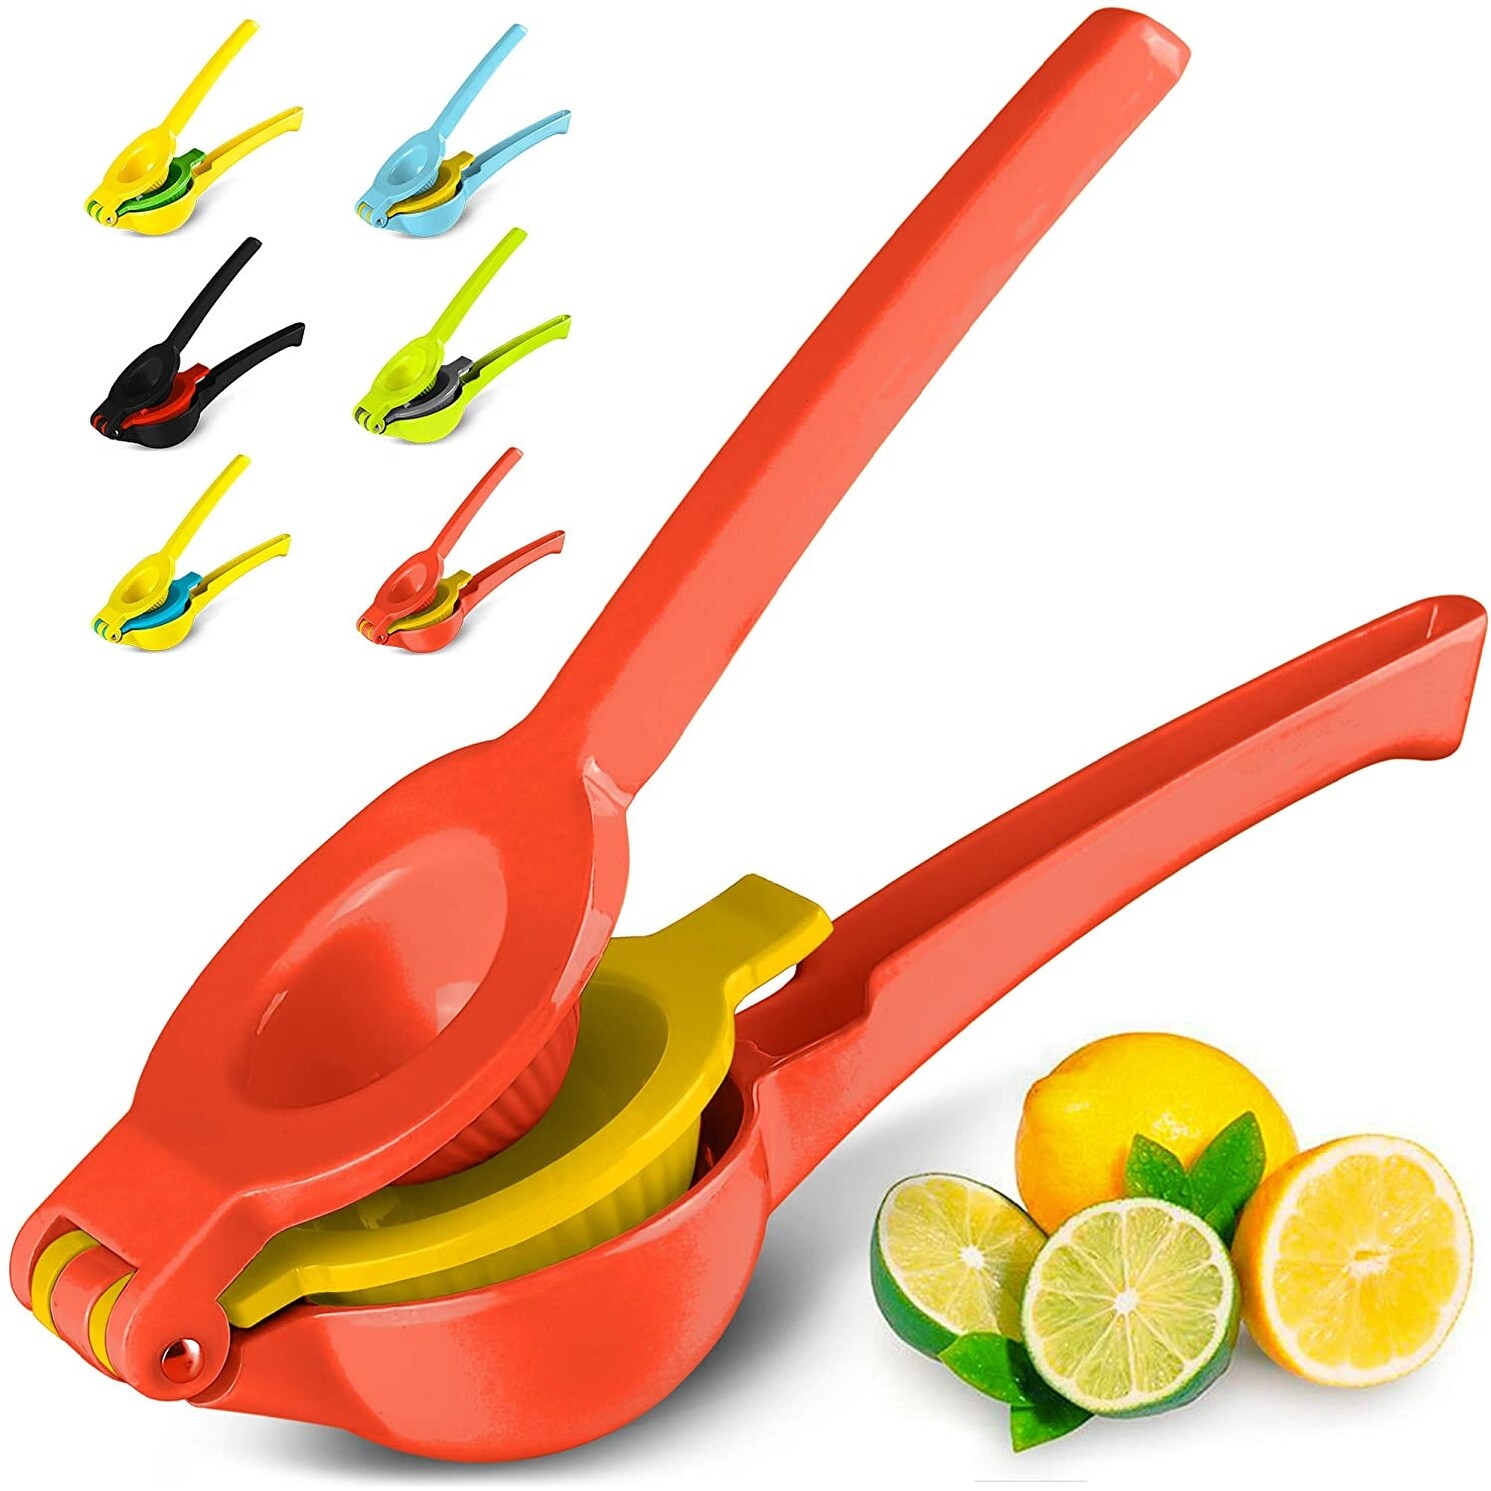 https://ak1.ostkcdn.com/images/products/is/images/direct/be704e862f9183626dfb3b5b9f50f00e89dd6eee/Zulay-Kitchen-Lemon-Lime-Squeezer%2C-2-in-1---Metal--Red-Yellow.jpg